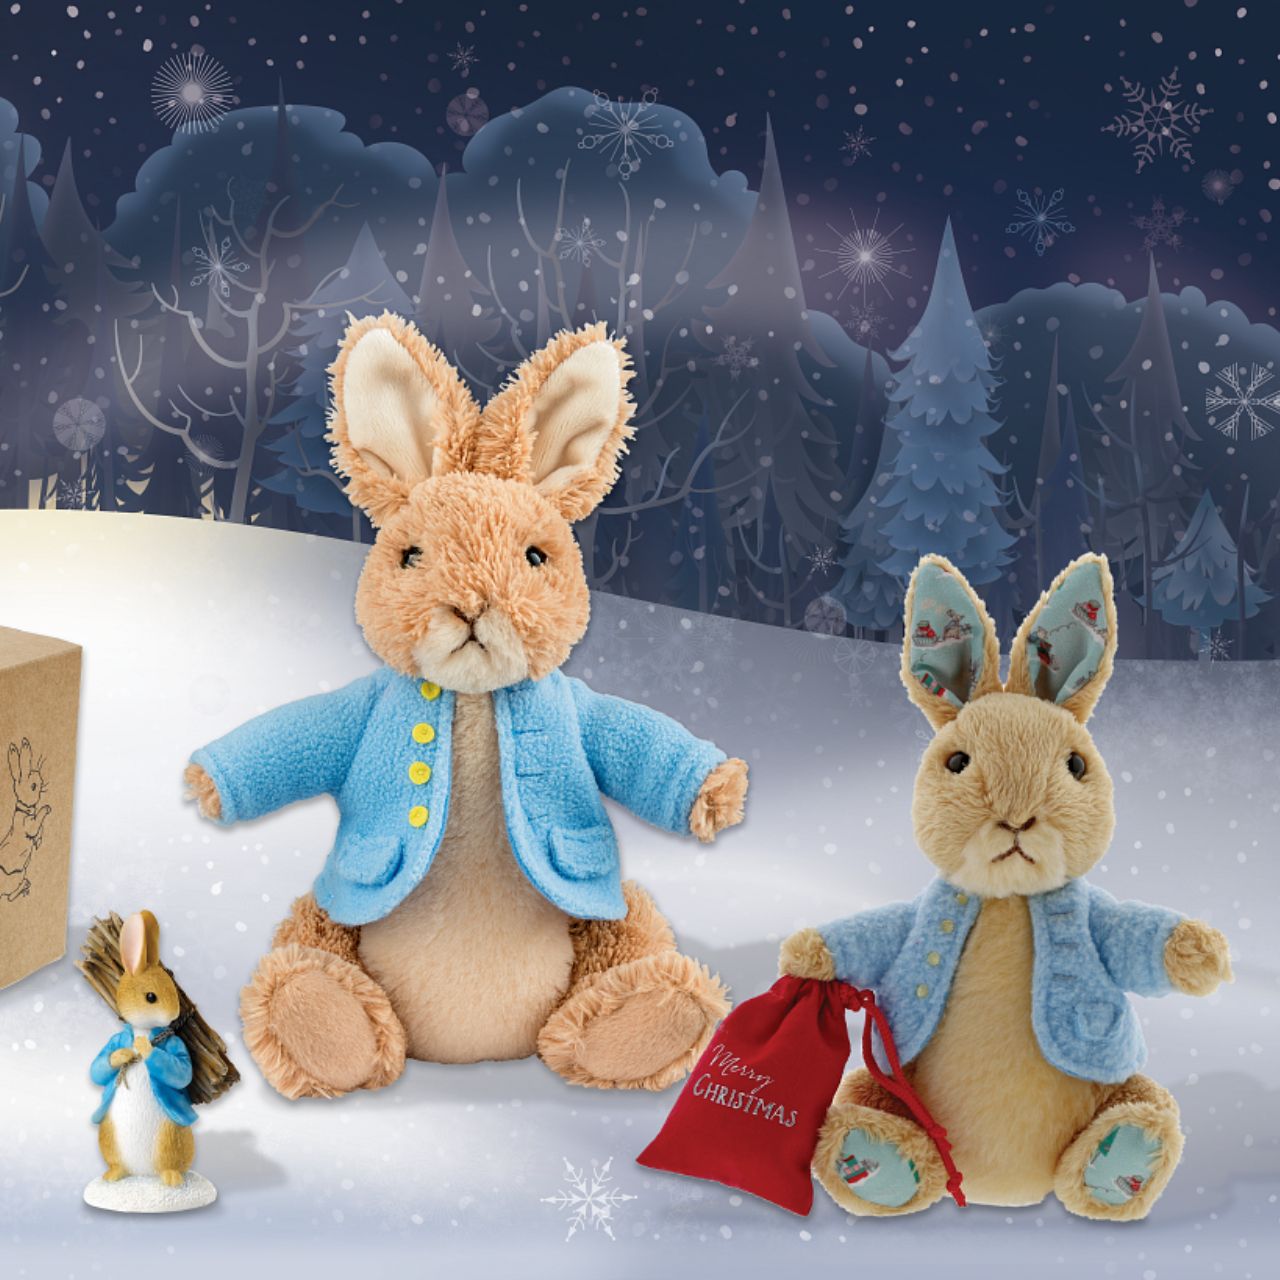 Beatrix Potter Peter Rabbit Christmas Small Soft Toy  We've added a touch of Christmas sparkle to our Peter Rabbit soft you. This Peter Rabbit will make the perfect keepsake for anyone who loves Christmas and the festivities it brings. A gift that isn't just for little ones, but for grownups too. Your new Peter Rabbit friend will arrive with a cute Christmas sack.